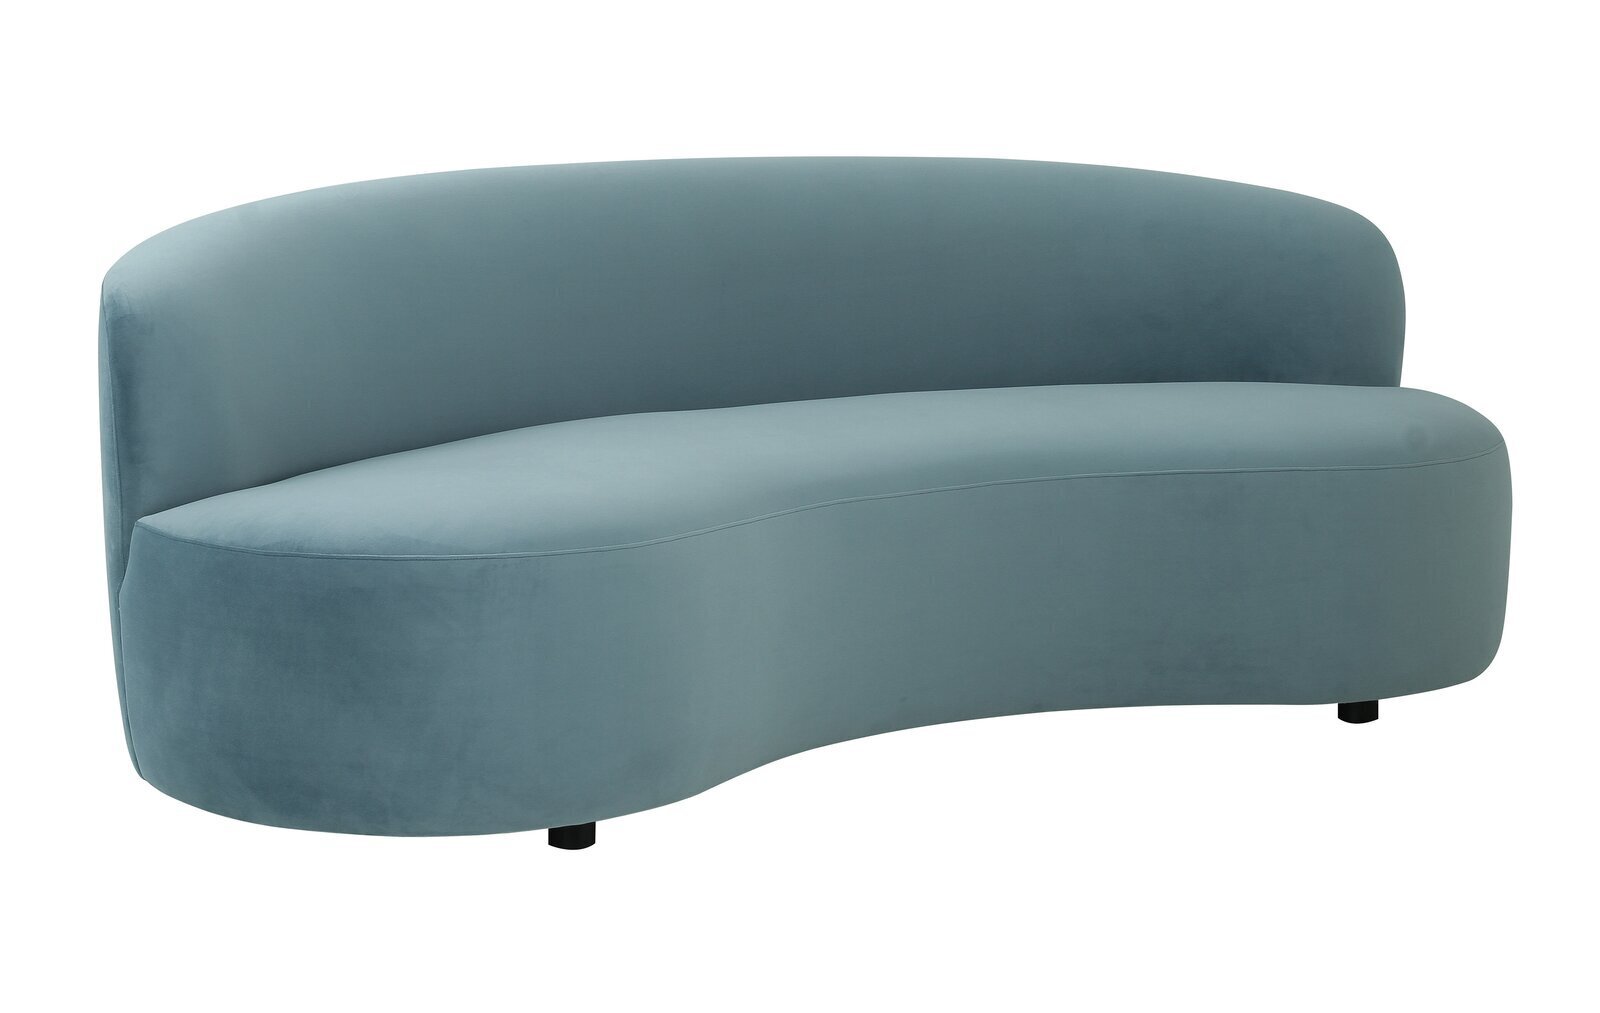 Designer Mid Century Modern Chic Curved Couch